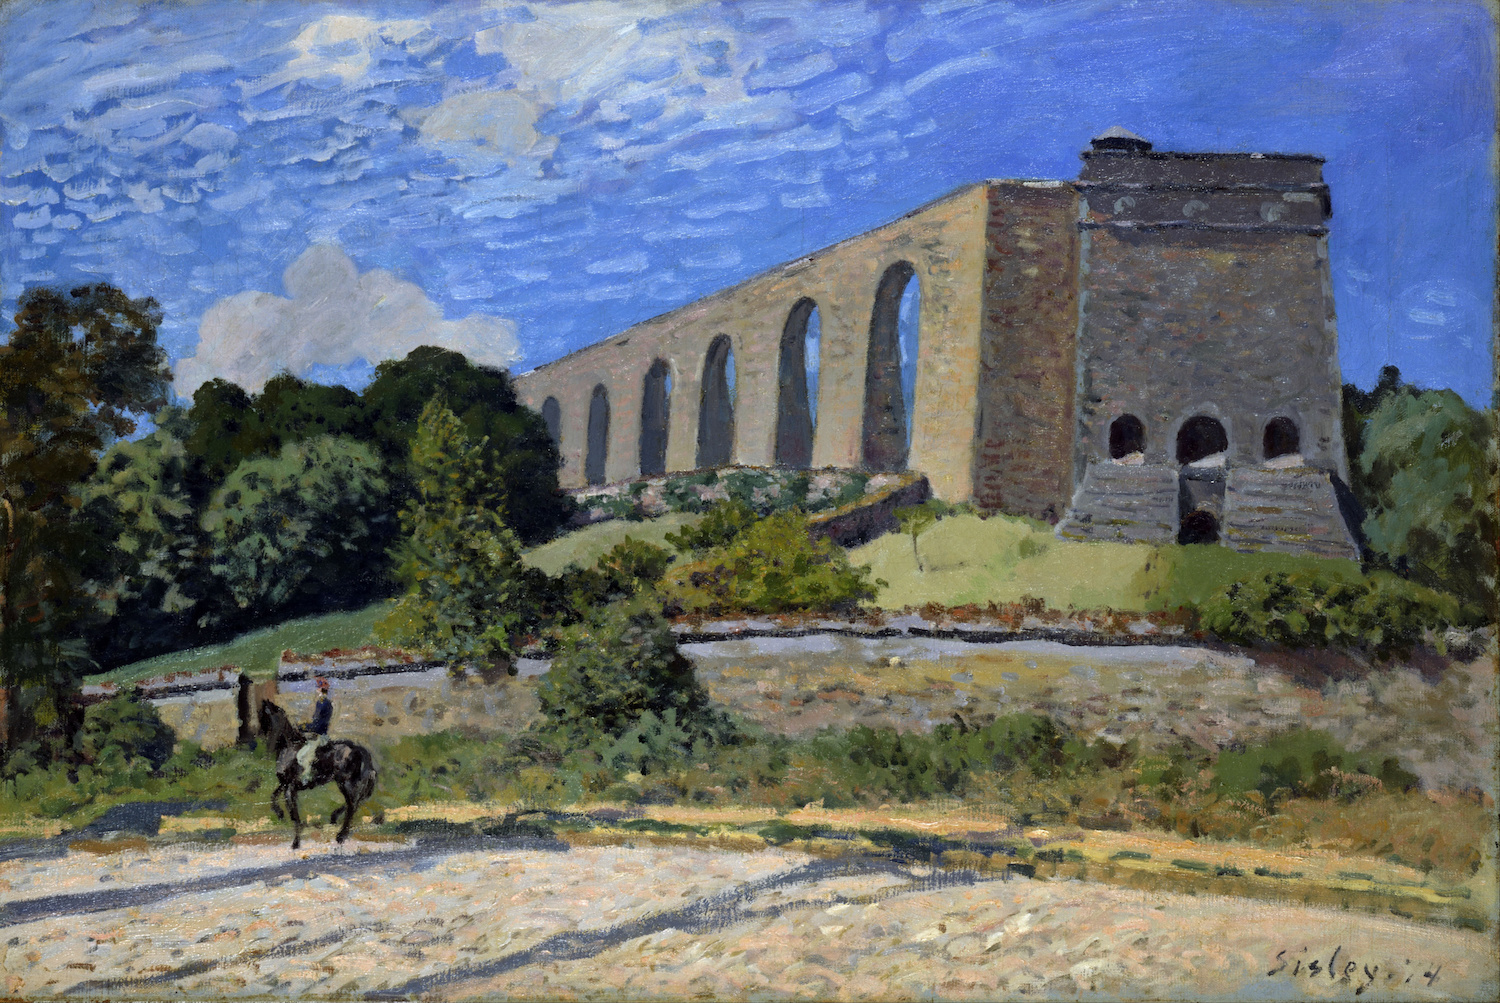 Aquaduct bij Marly by Alfred Sisley - 1874 - 81,3 x 54,3 cm 